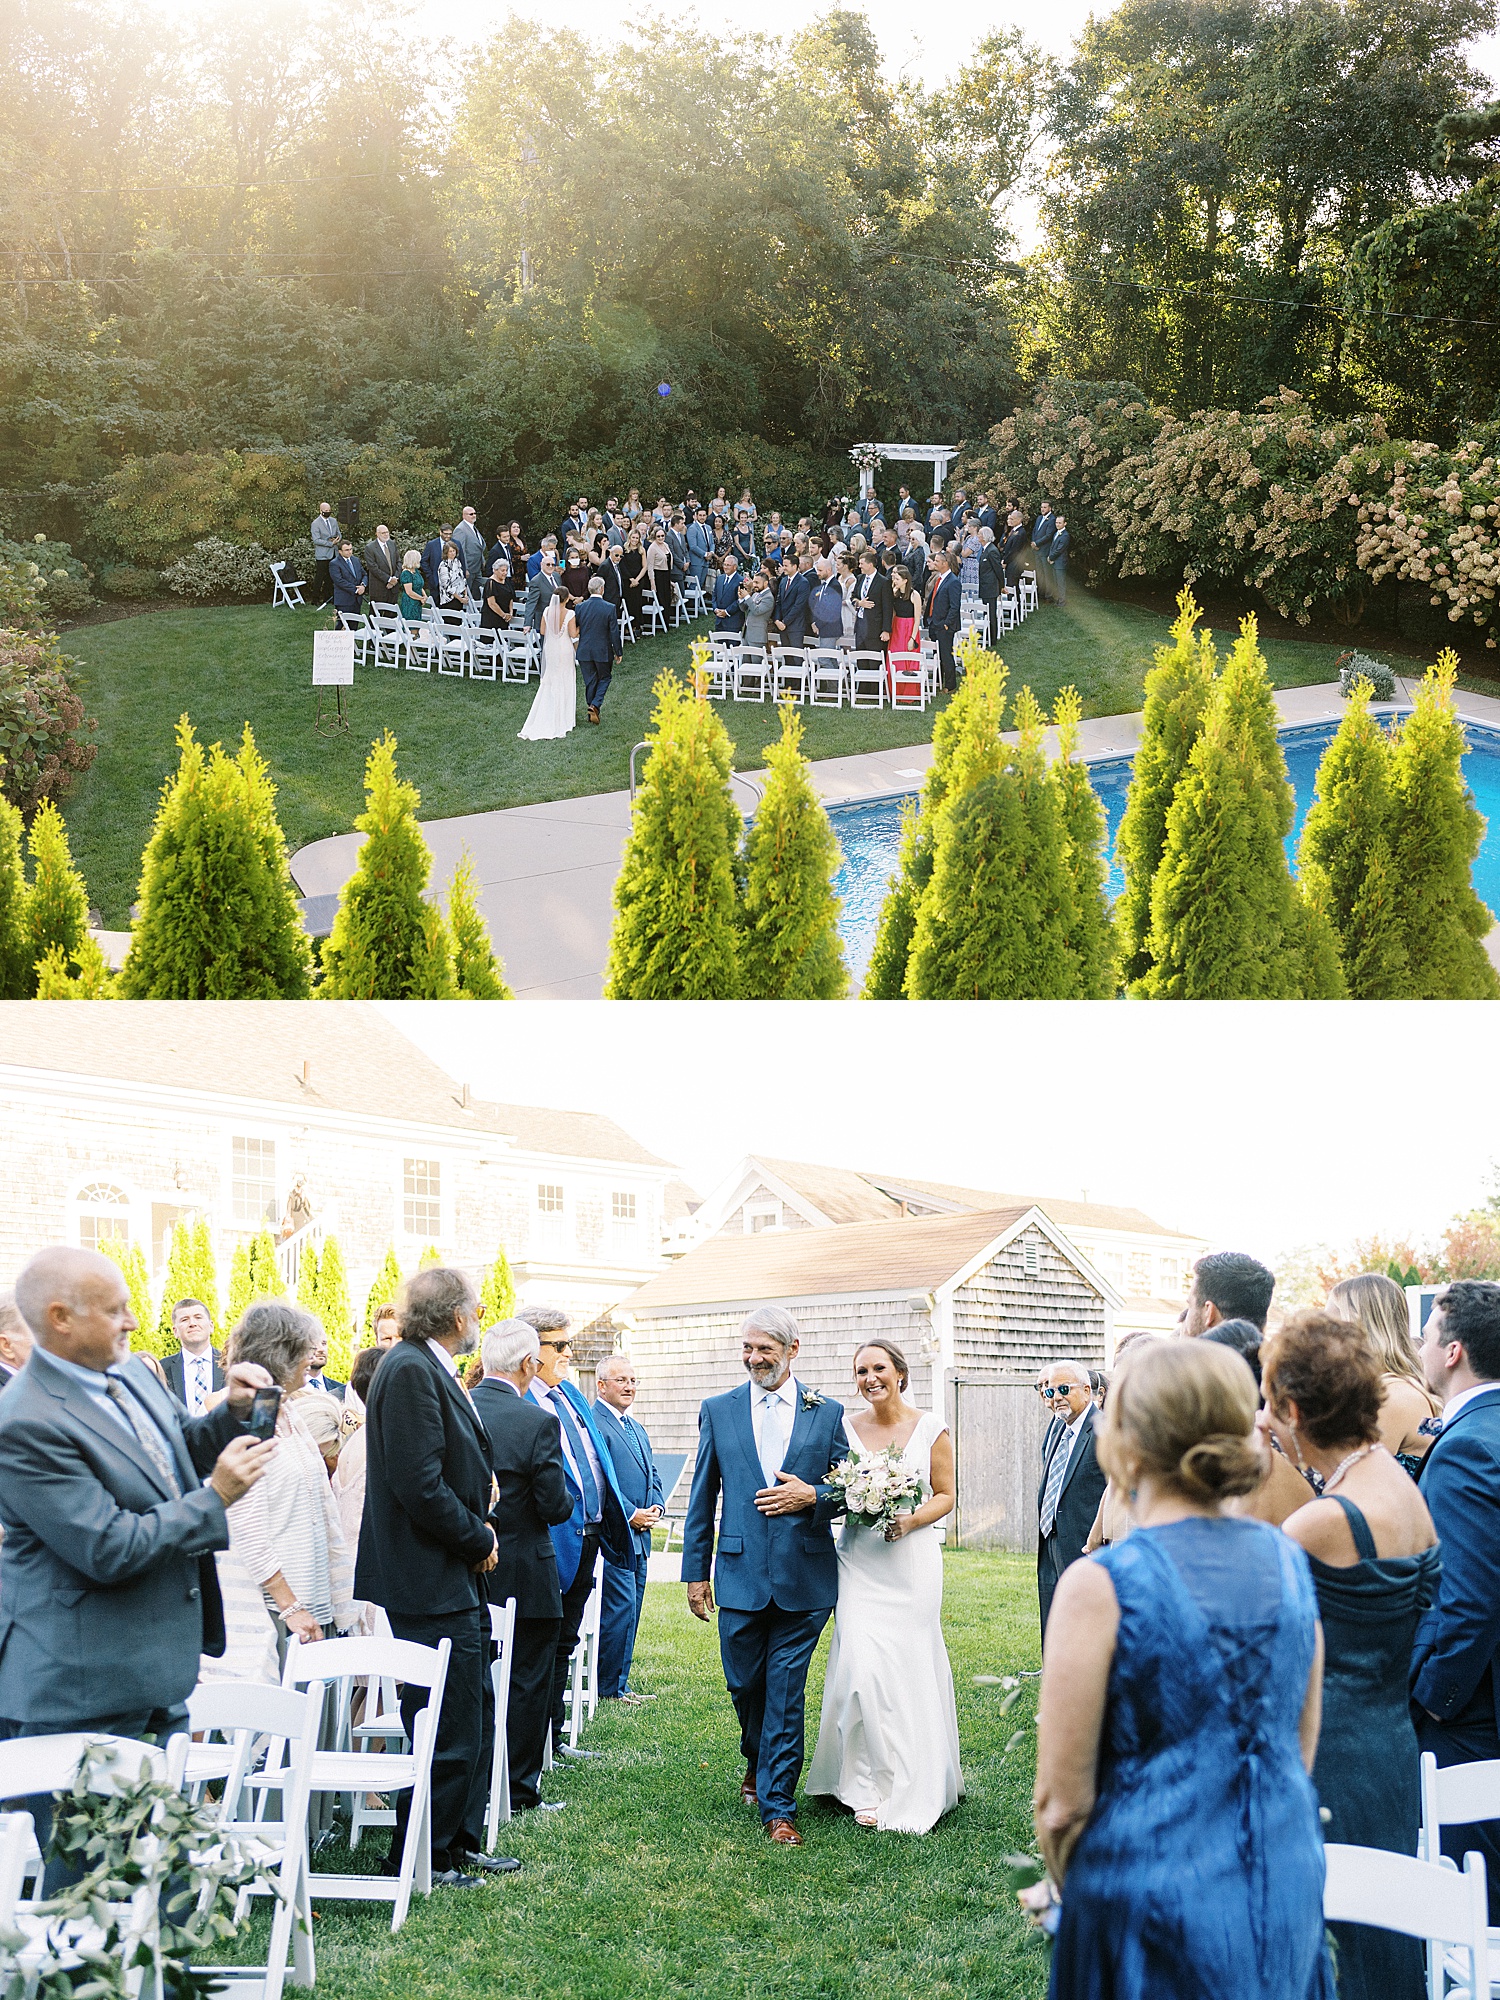 Outdoor wedding ceremony by pool by Cape Cod wedding photographer Lynne Reznick